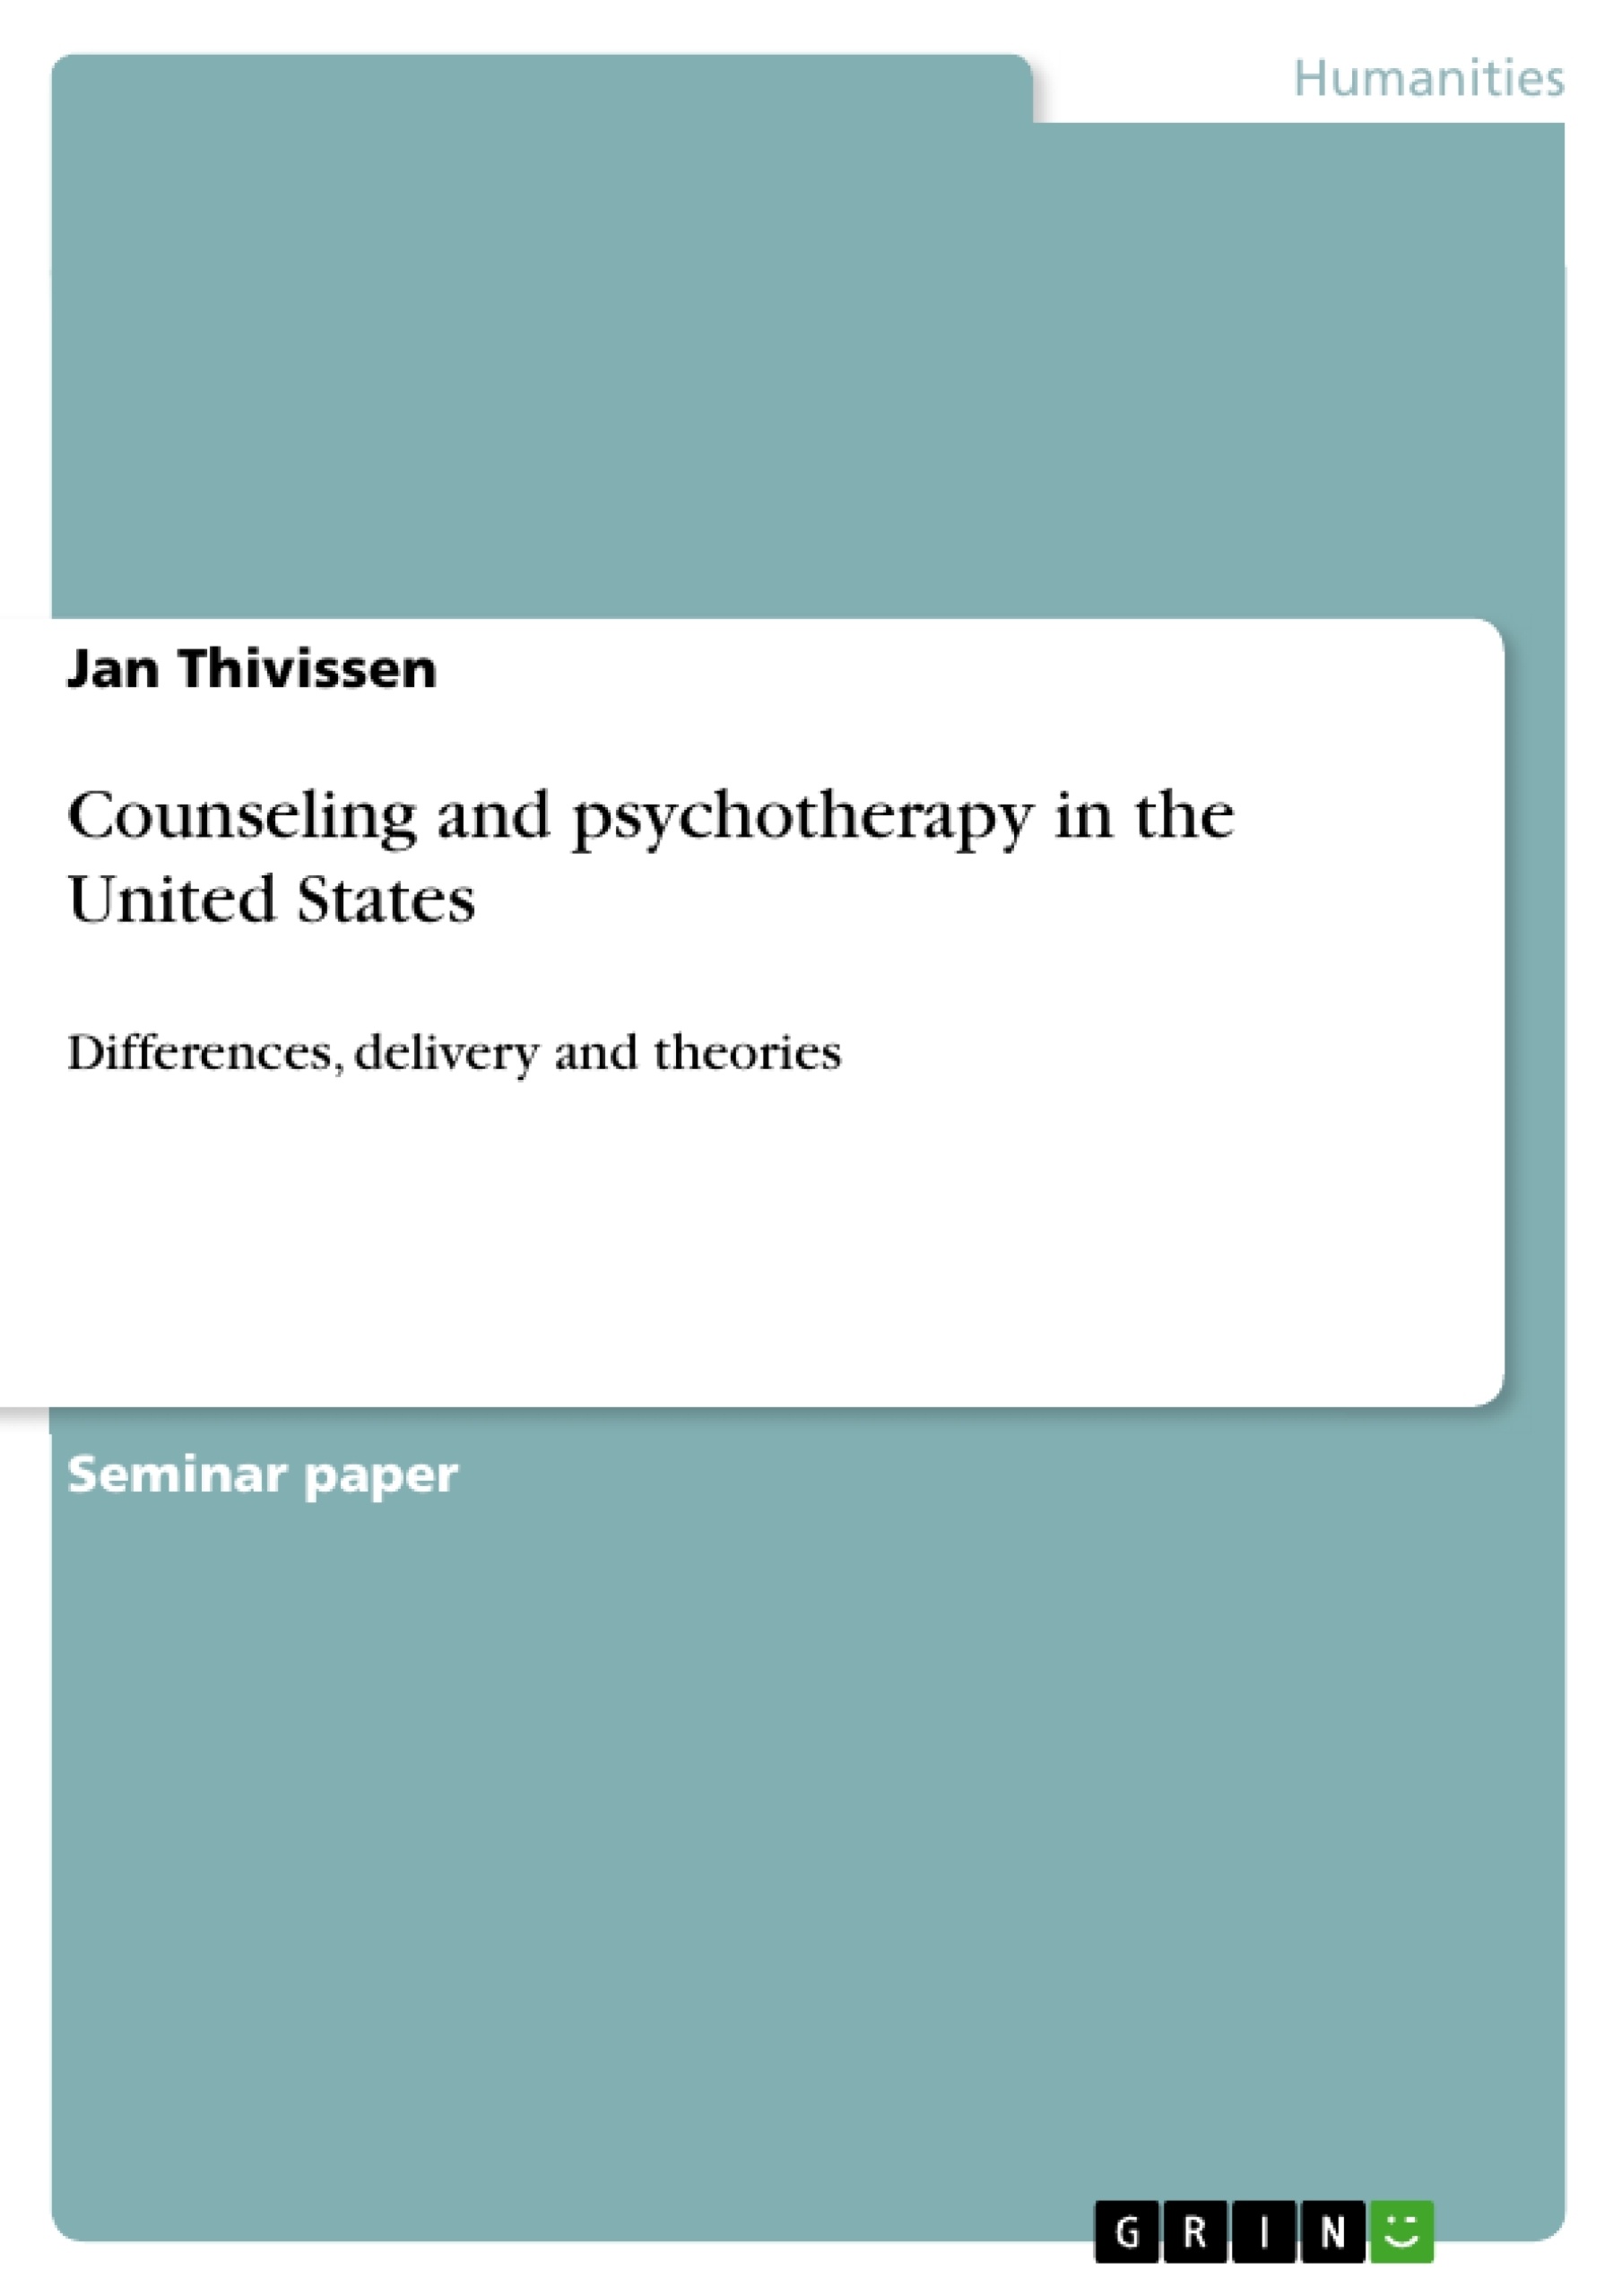 Title: Counseling and psychotherapy in the United States